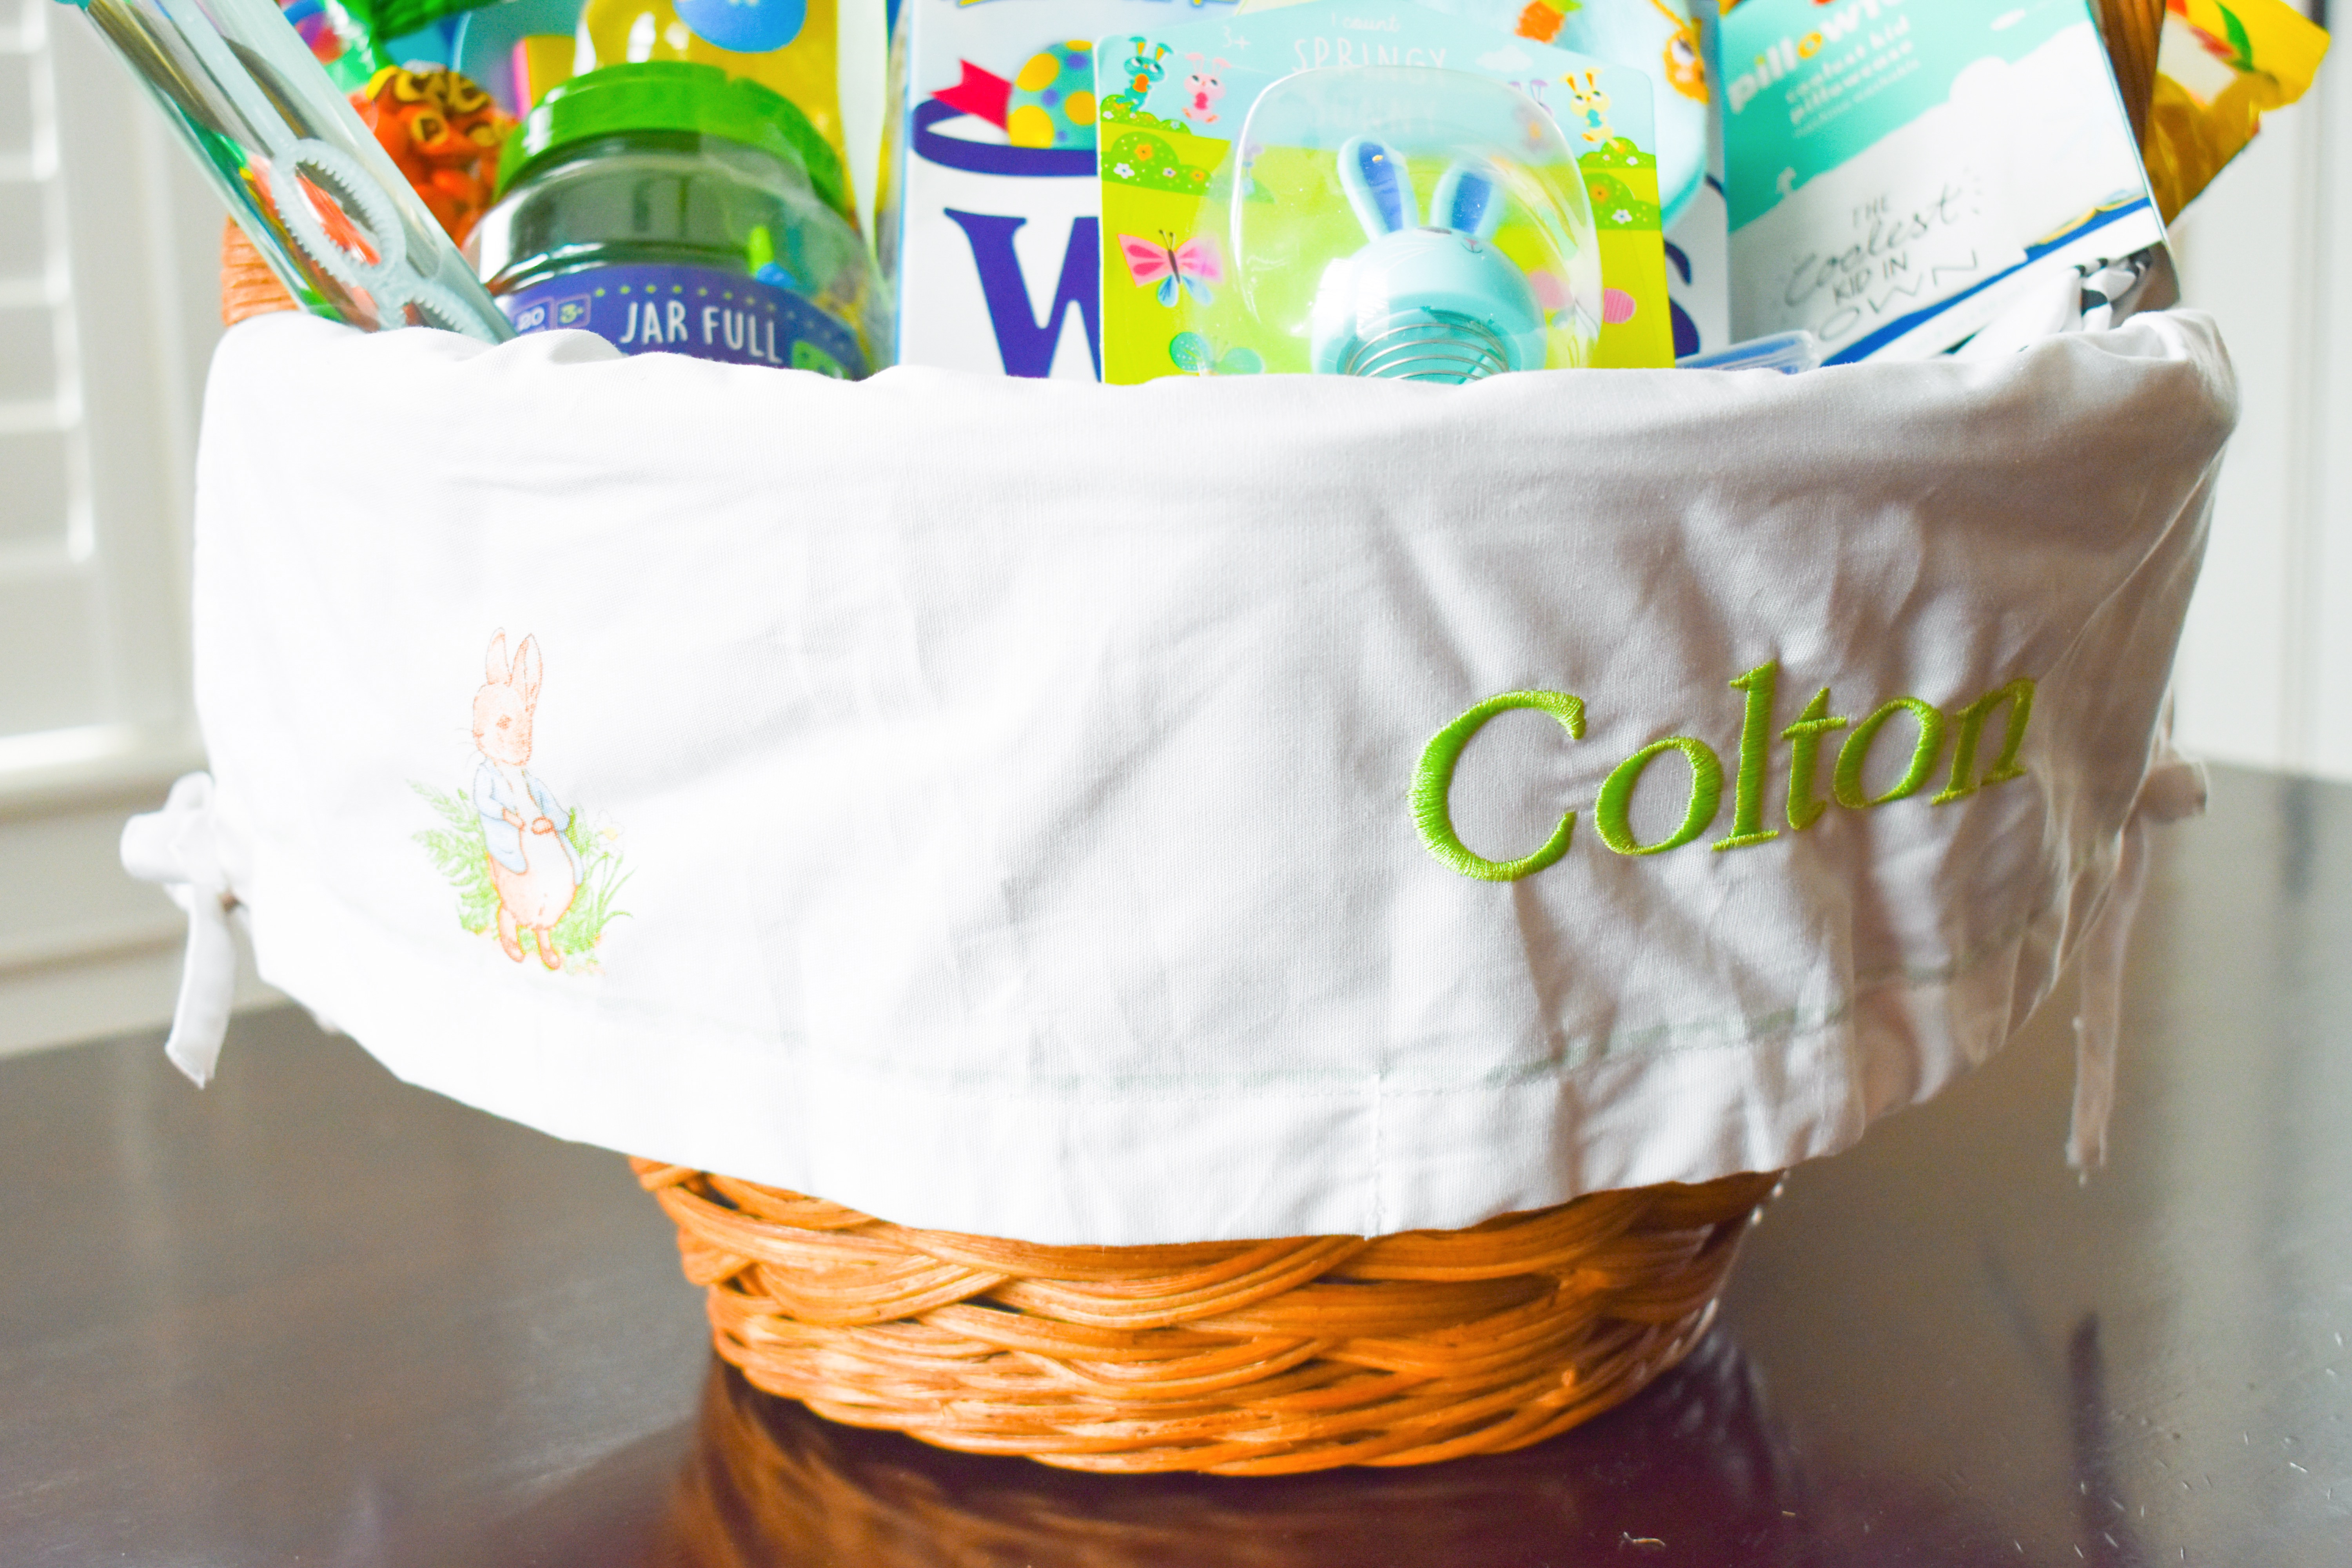 Easter Basket Ideas for 2-Year-Old Boys